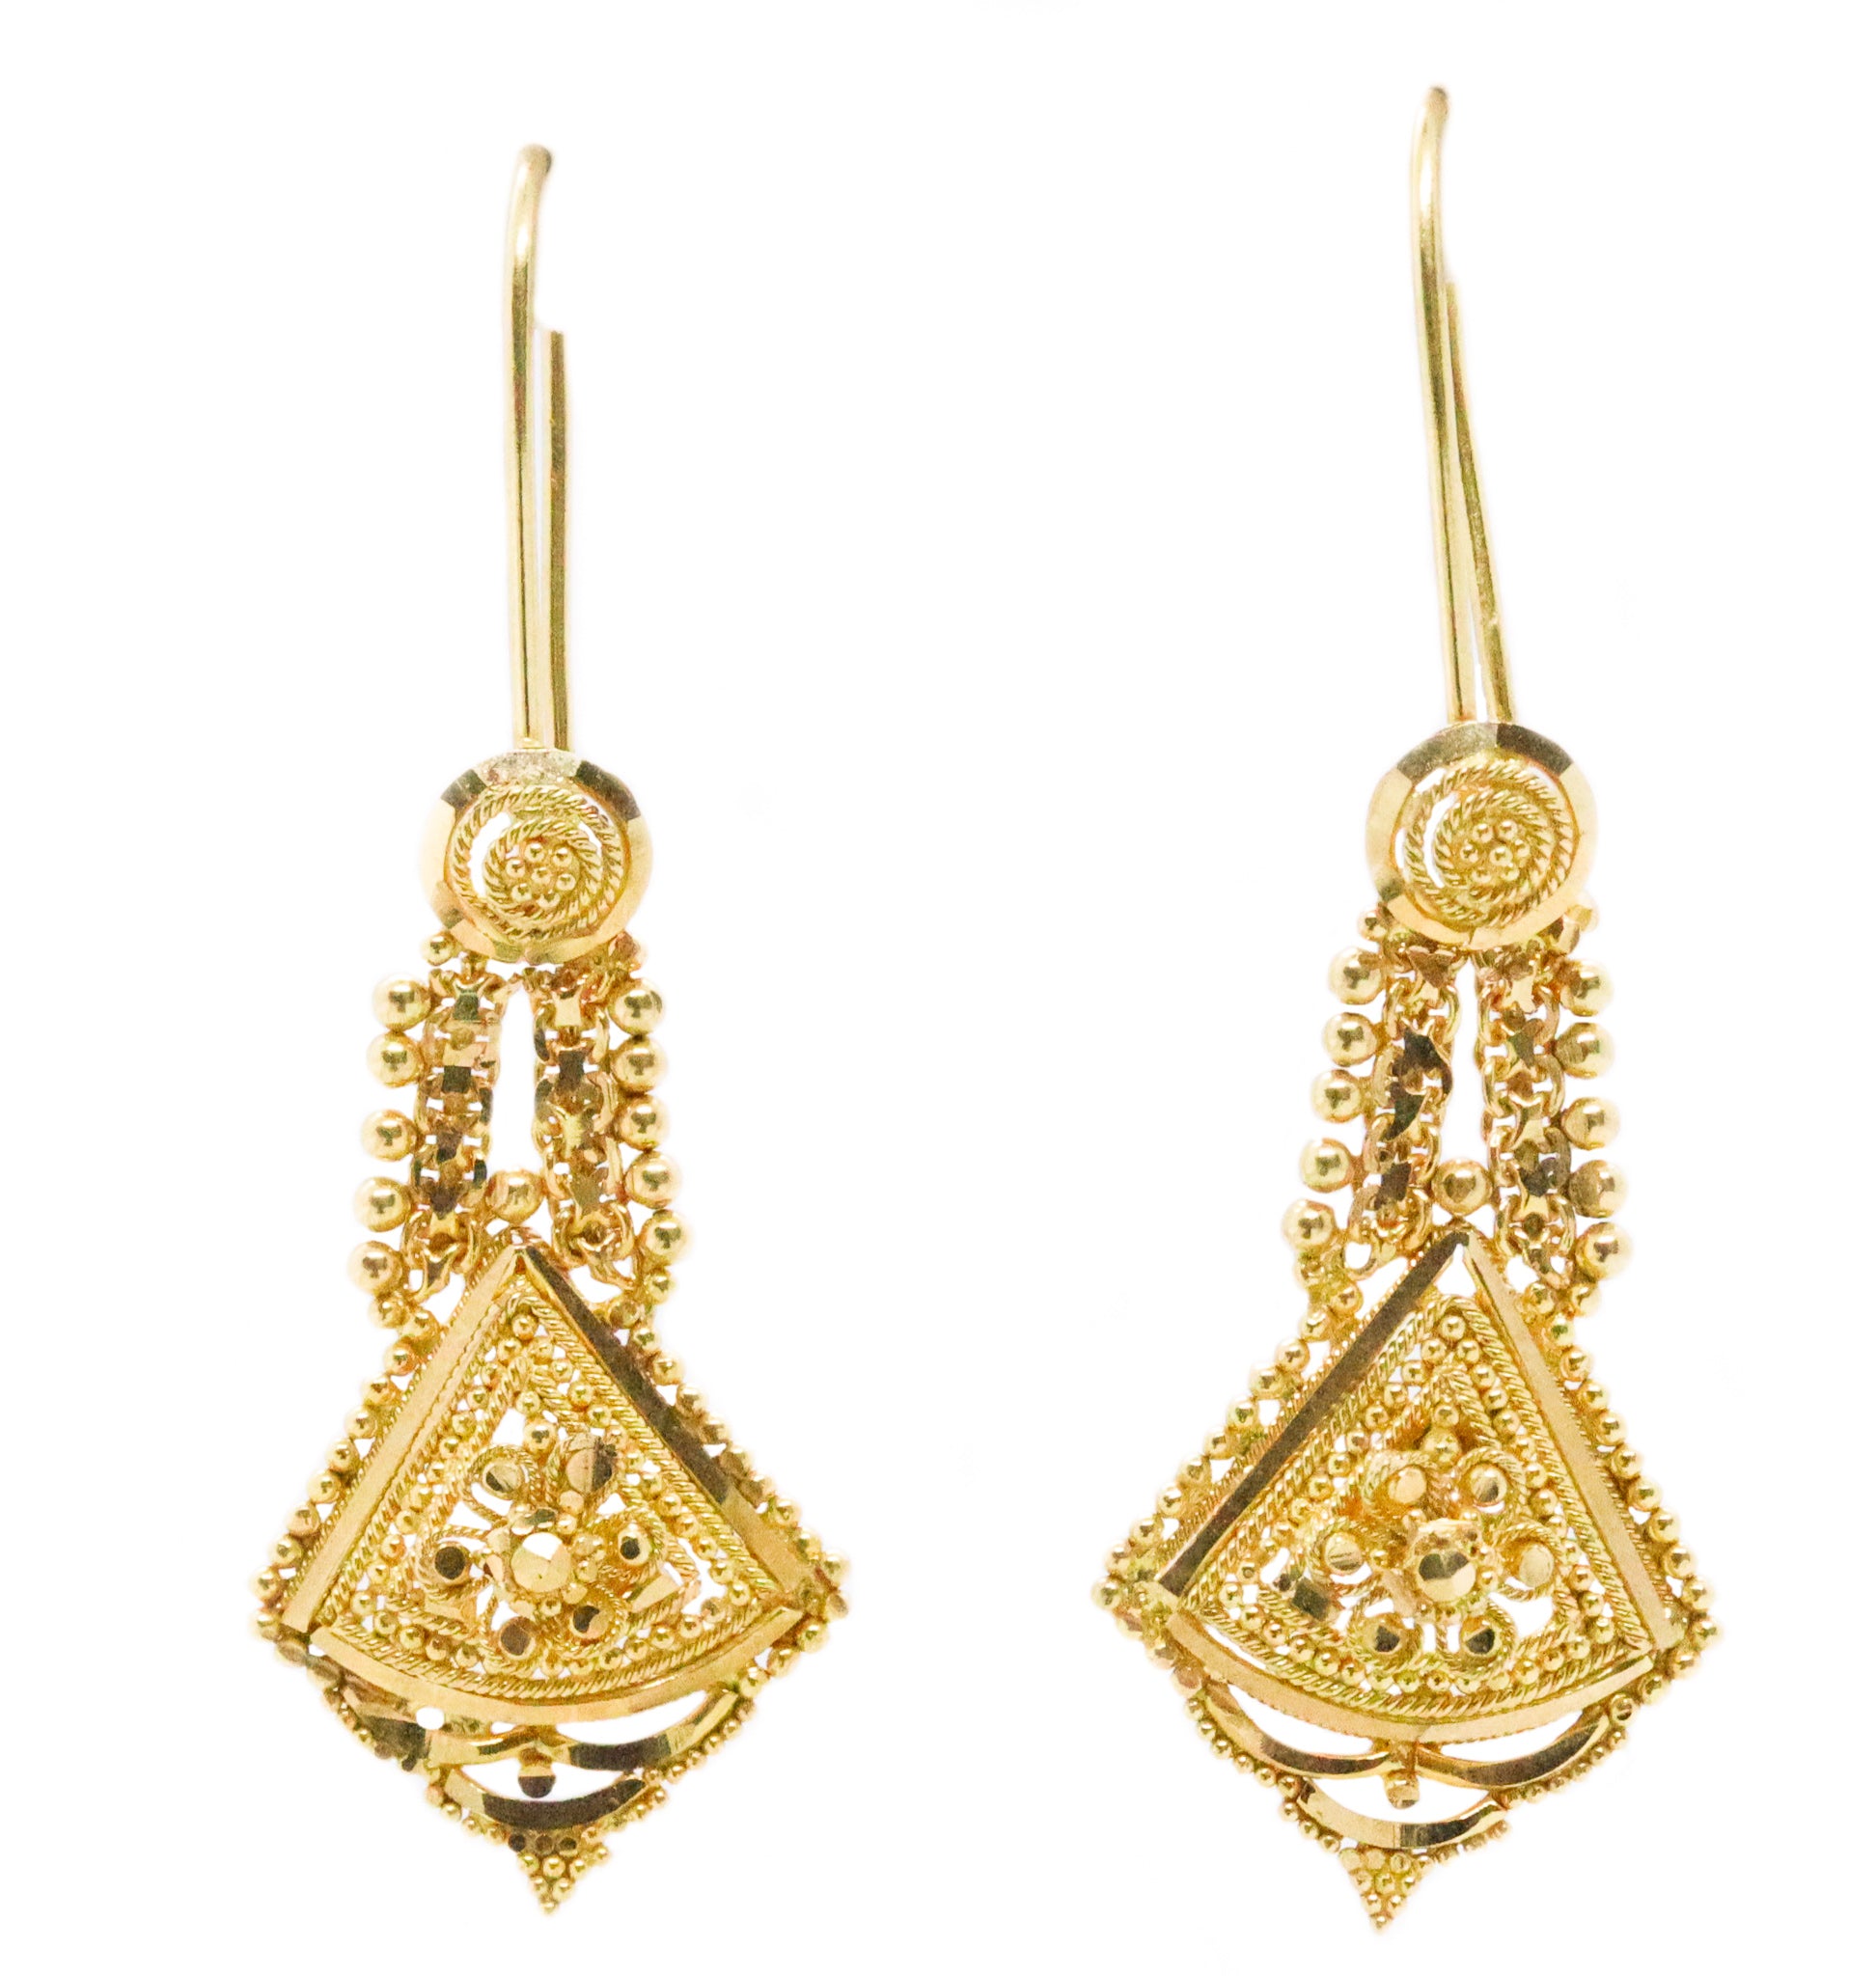 HAND MADE 21 KT GOLD ORIENTALISM HANGING EARRINGS